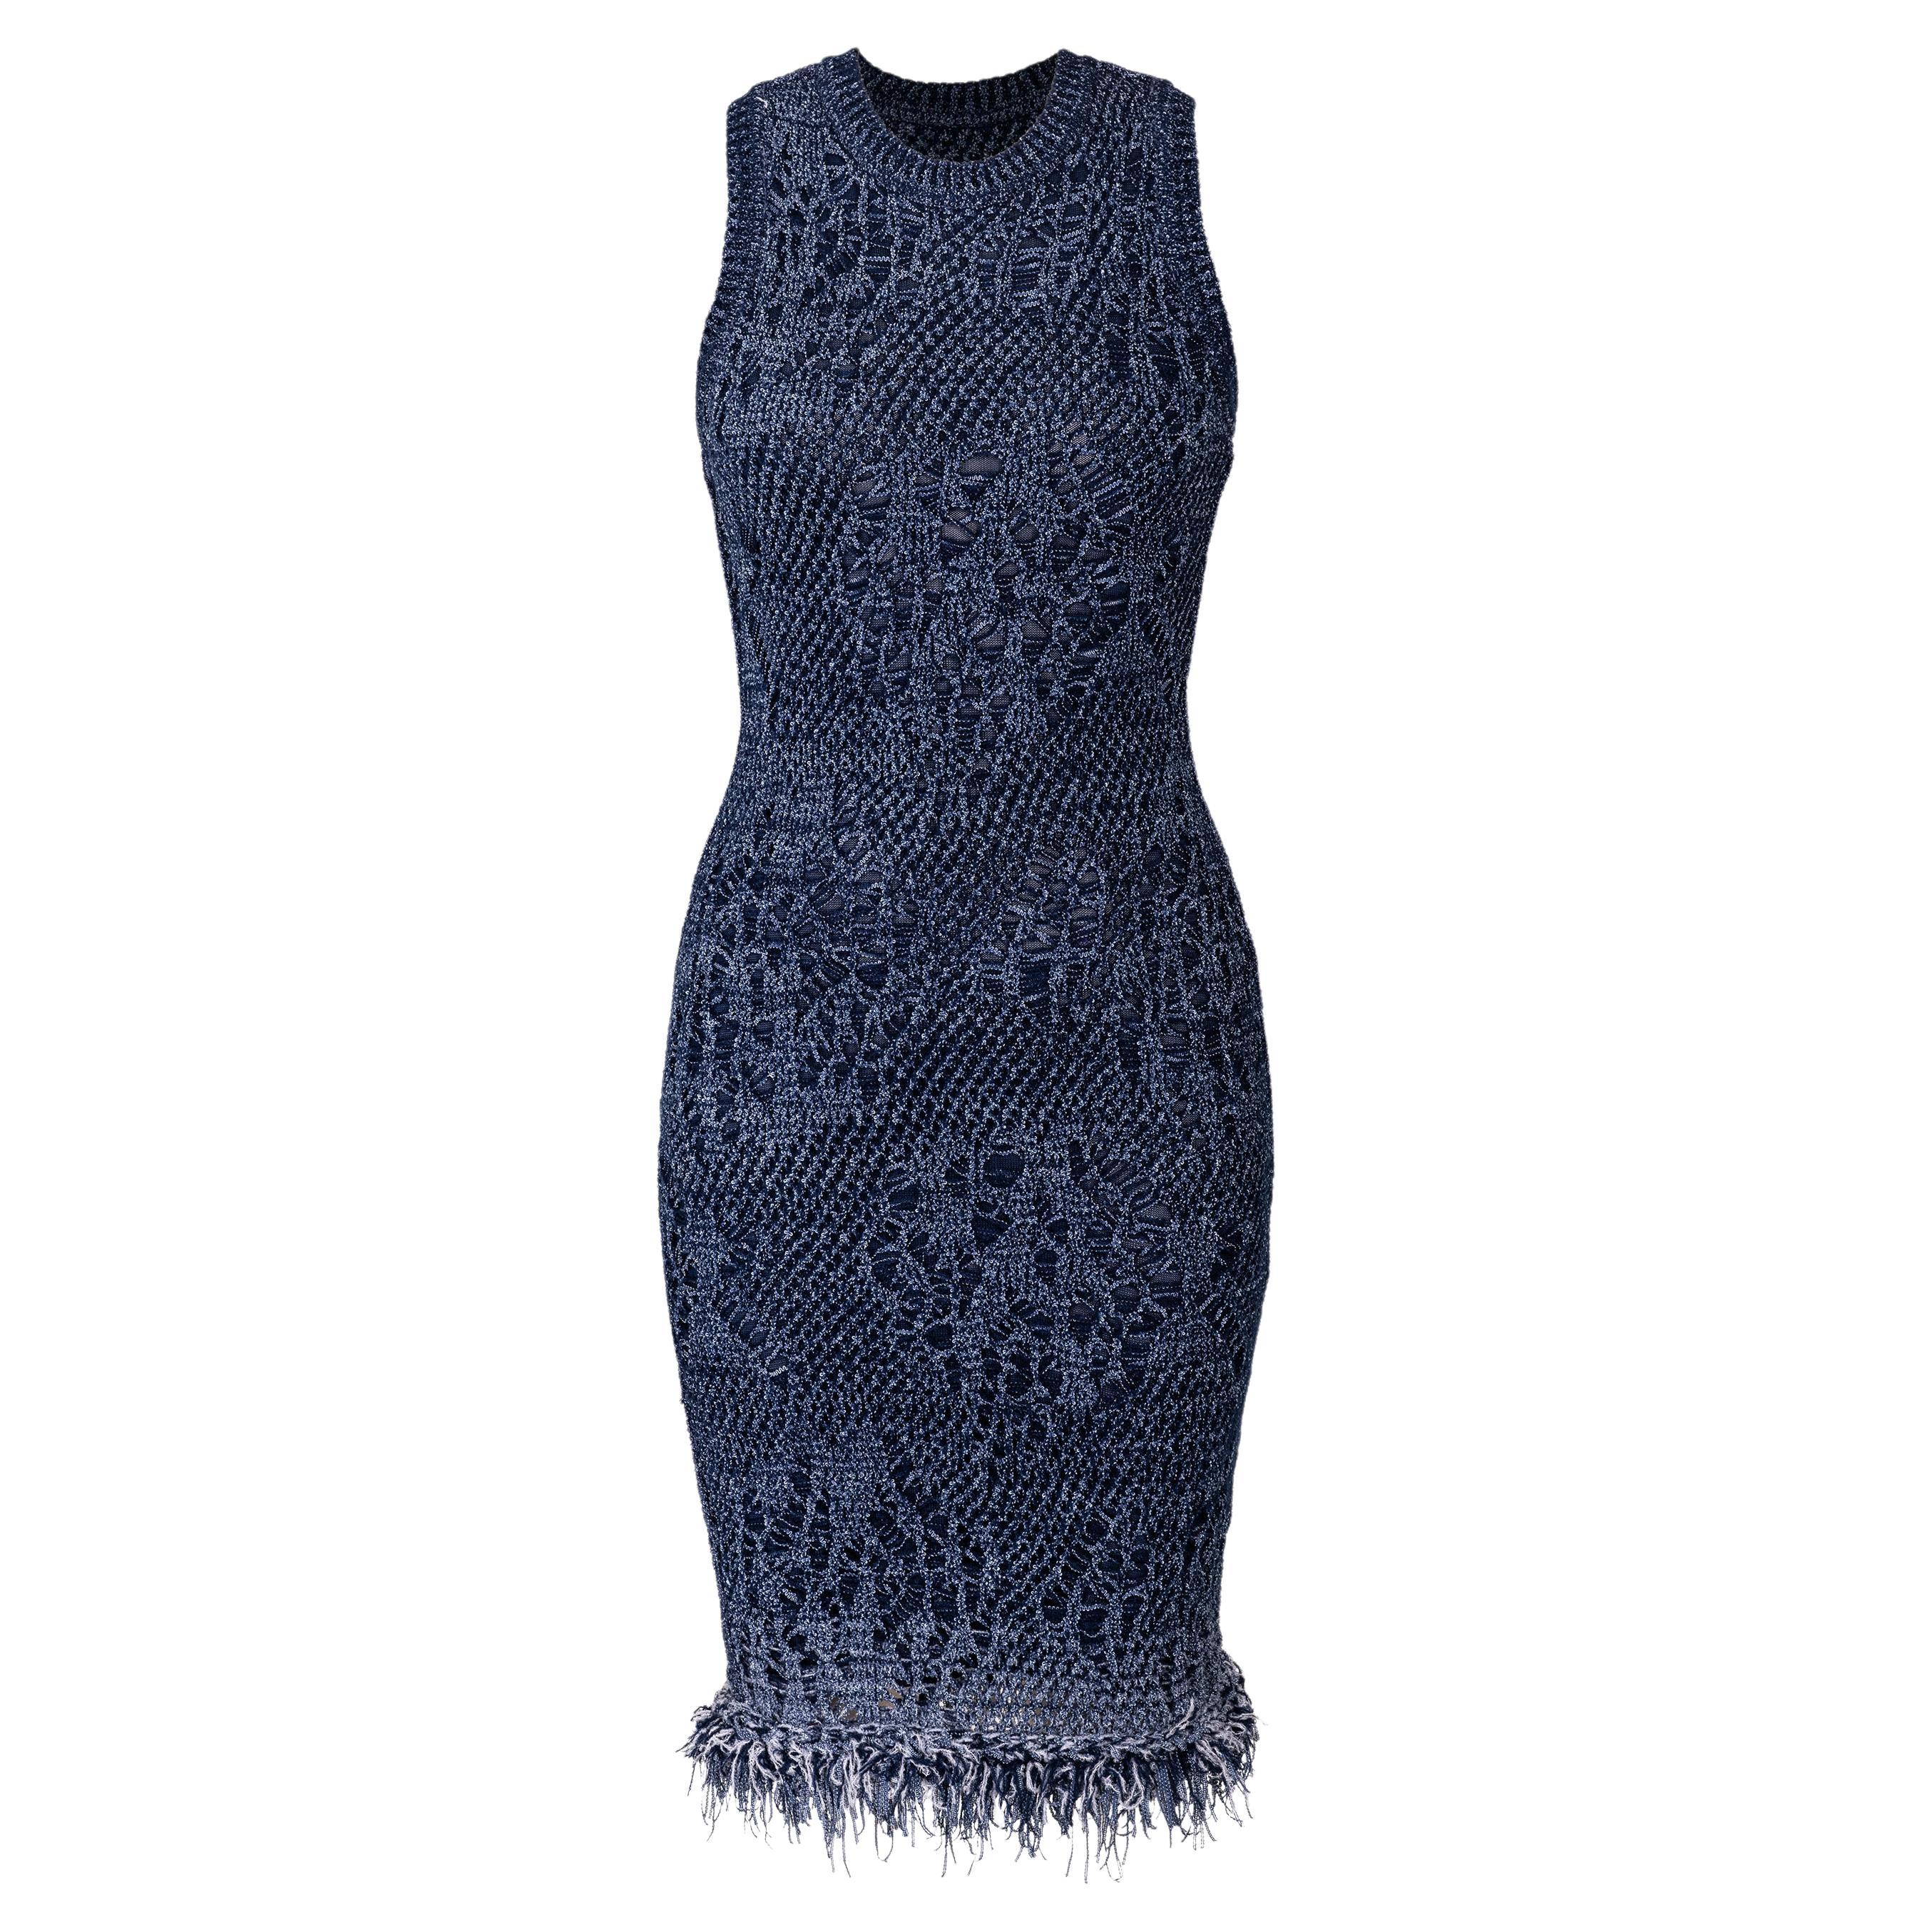 S/S 2000 Christian Dior by Galliano Deep Blue Knit Dress with Faux Feather Trim